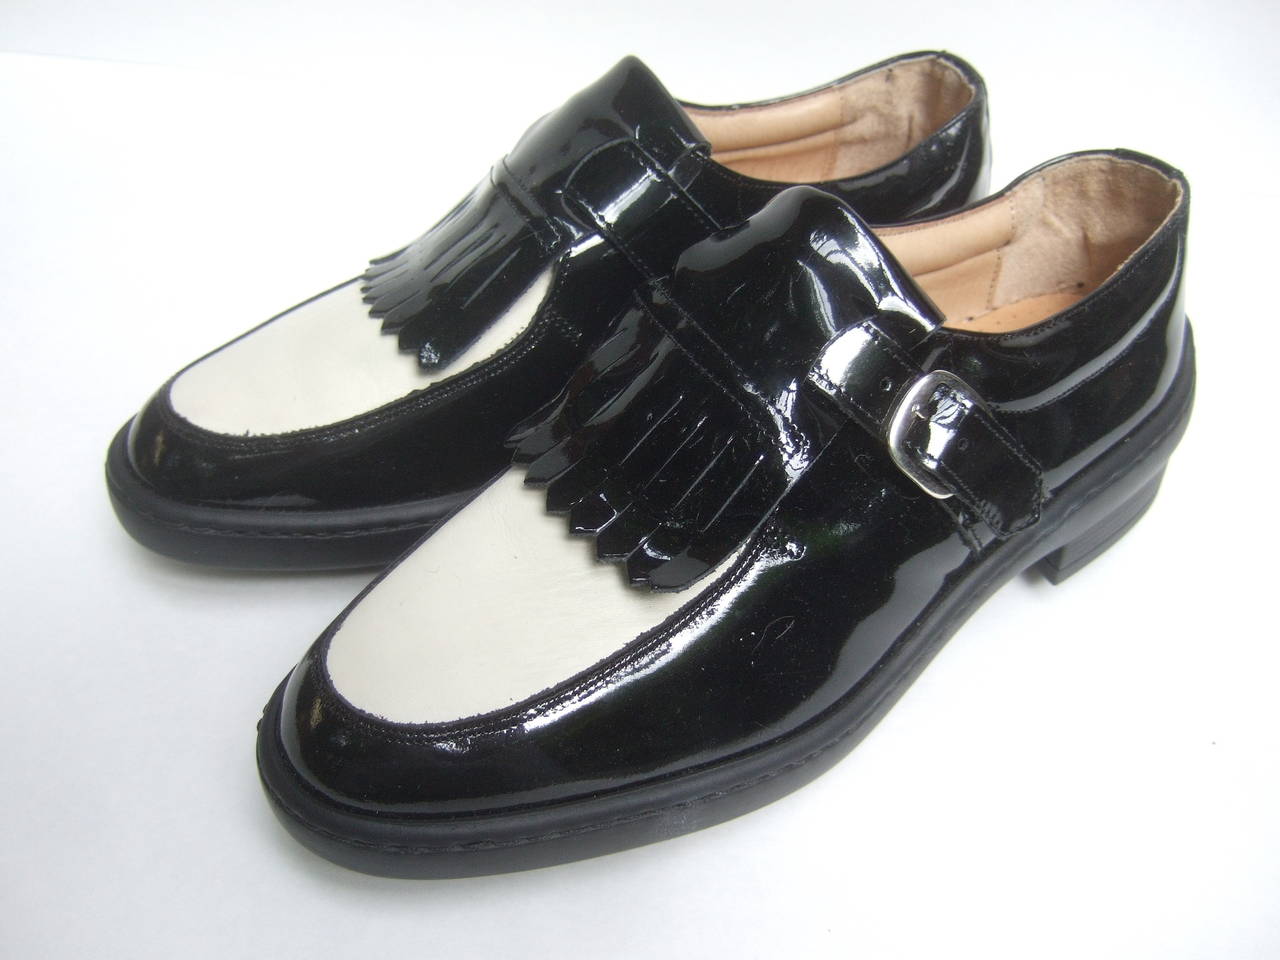 Black Women's Italian New Patent Leather Brogue Golf Shoes US Size 7.5